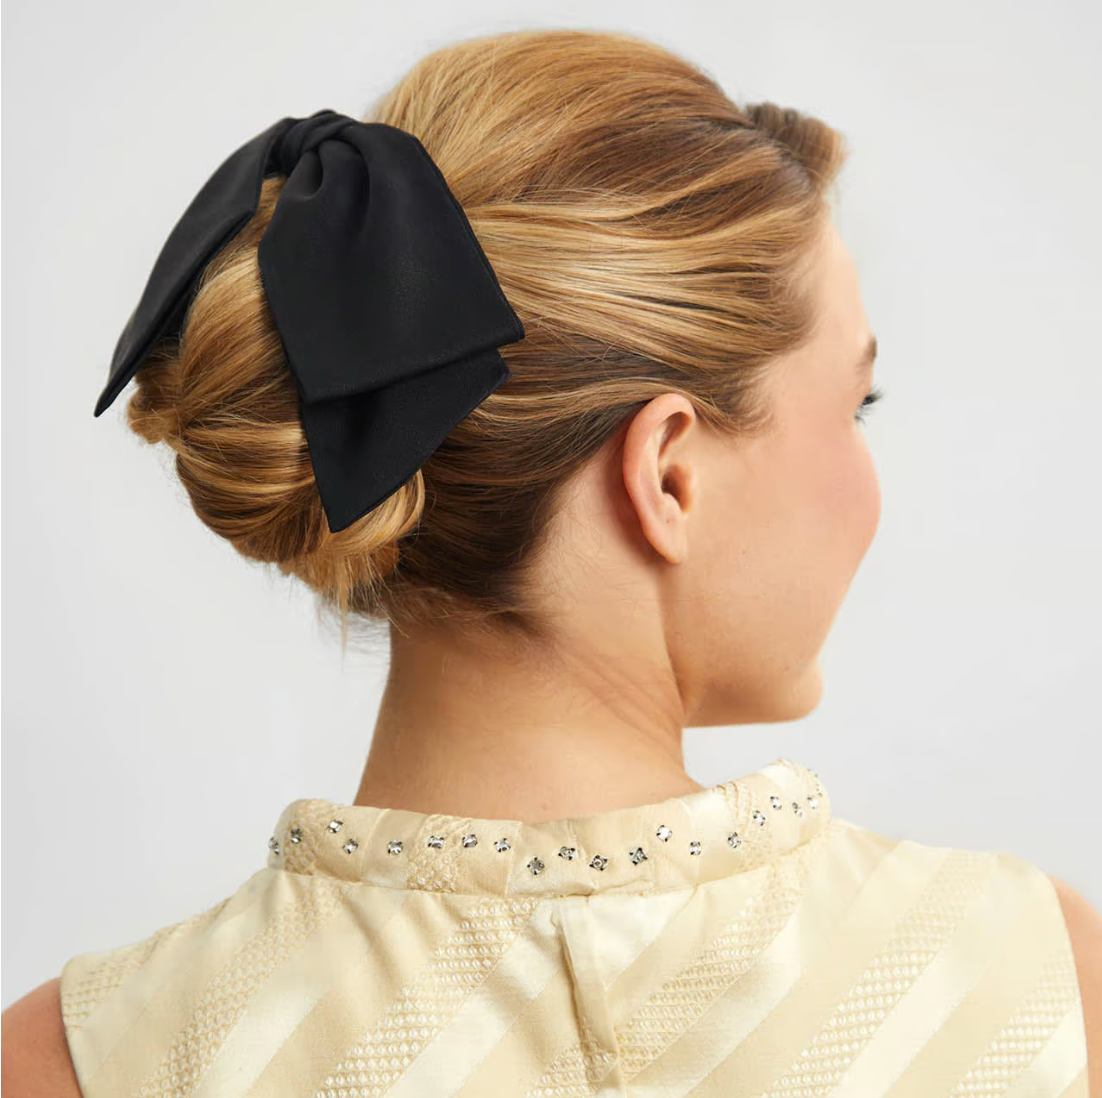 KITSCH - Recycled Fabric Bow Hair Clip - Black